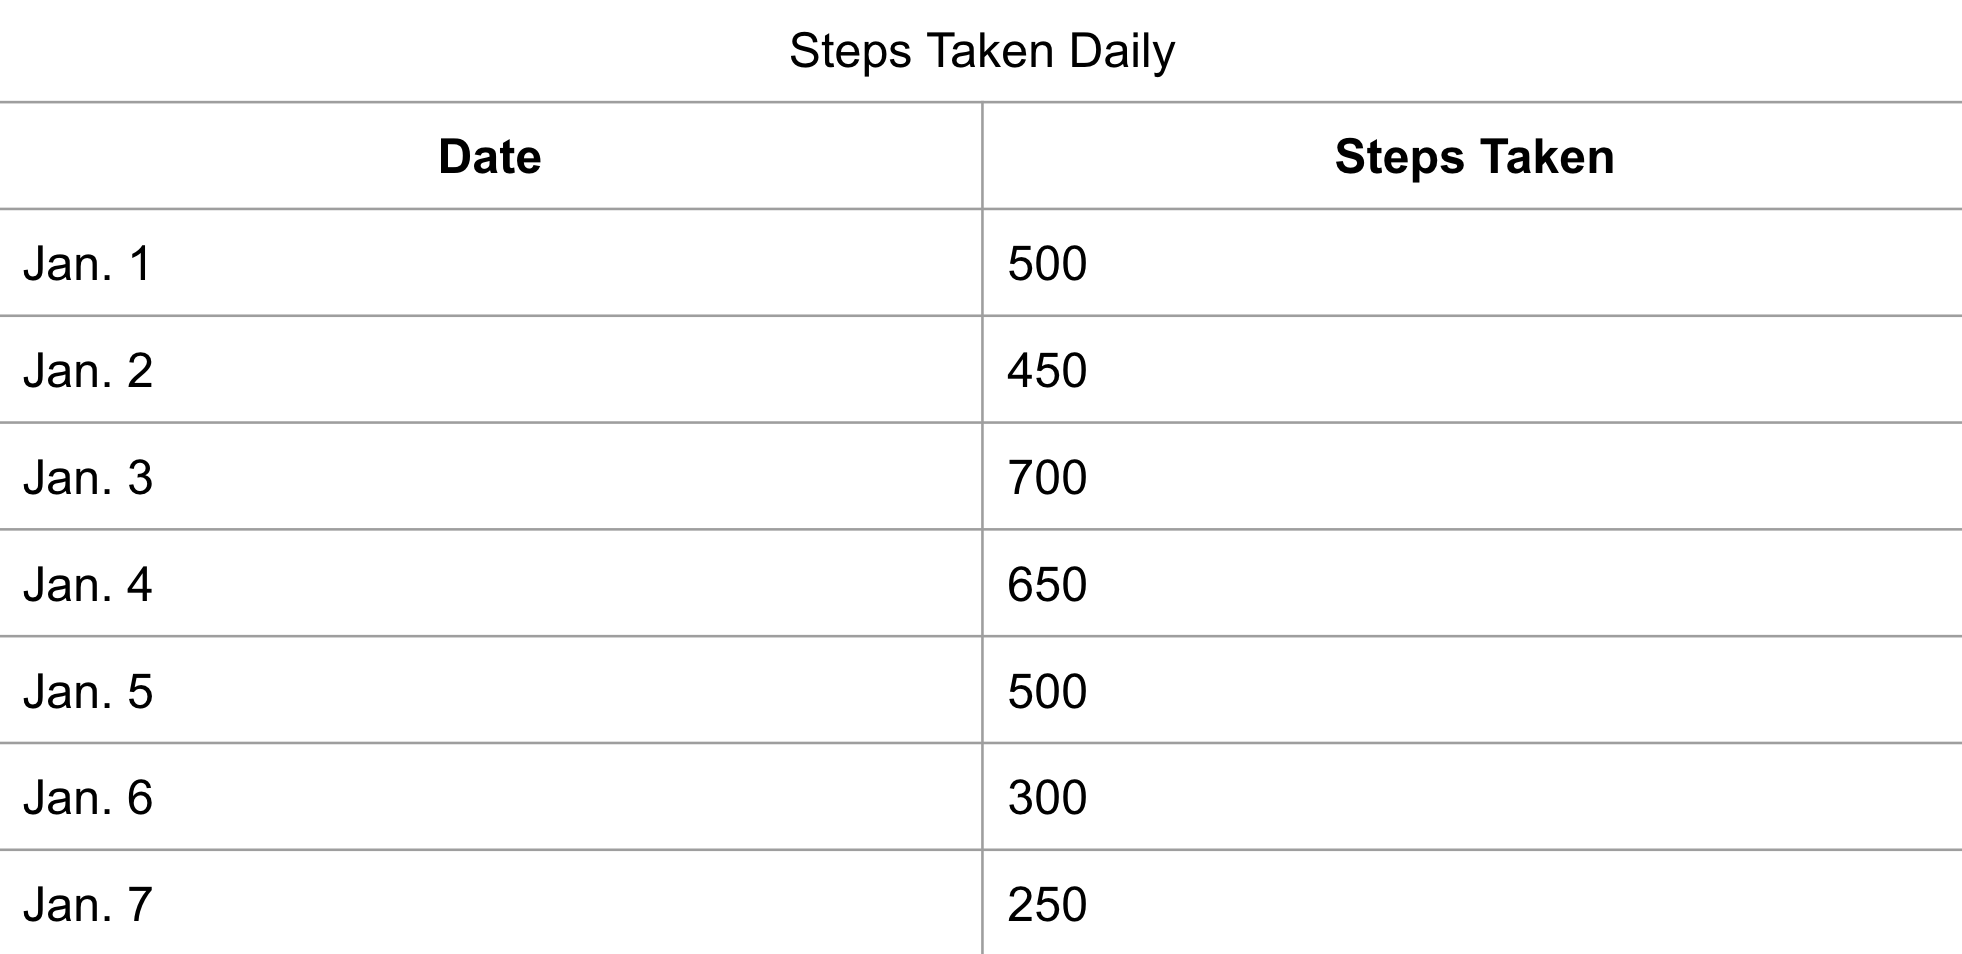 A table of steps taken on different days